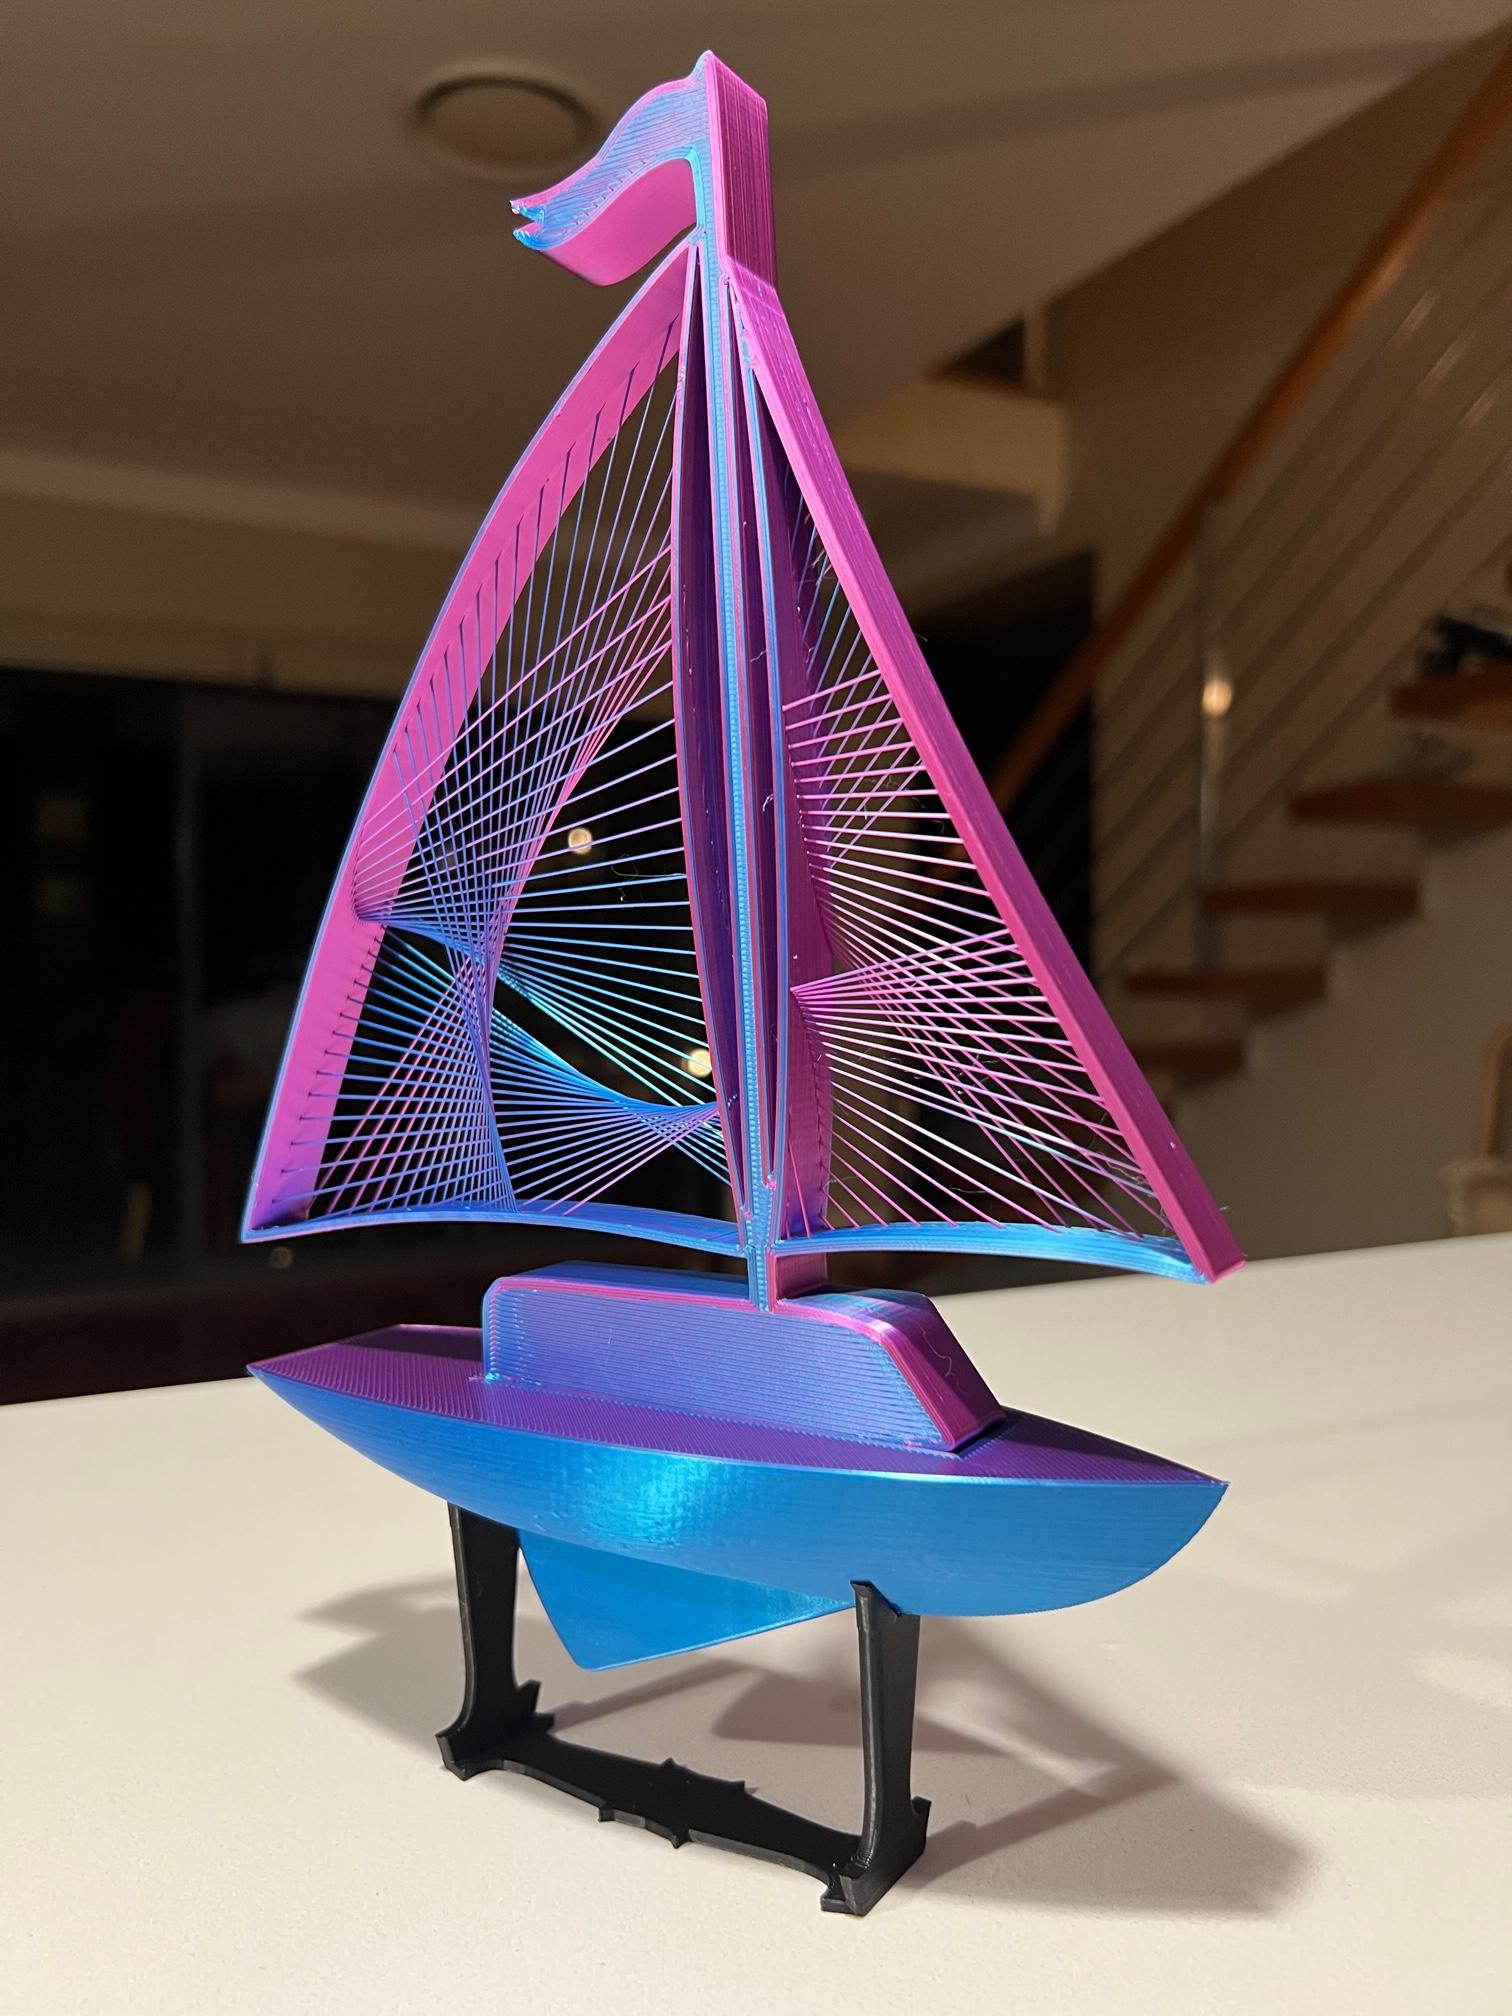 Sailboat - no supports - Printed on Bambu Lab X1-Carbon with eSUN PLA Magic. 5hrs for the lot. Thank you for the beautiful model. - 3d model